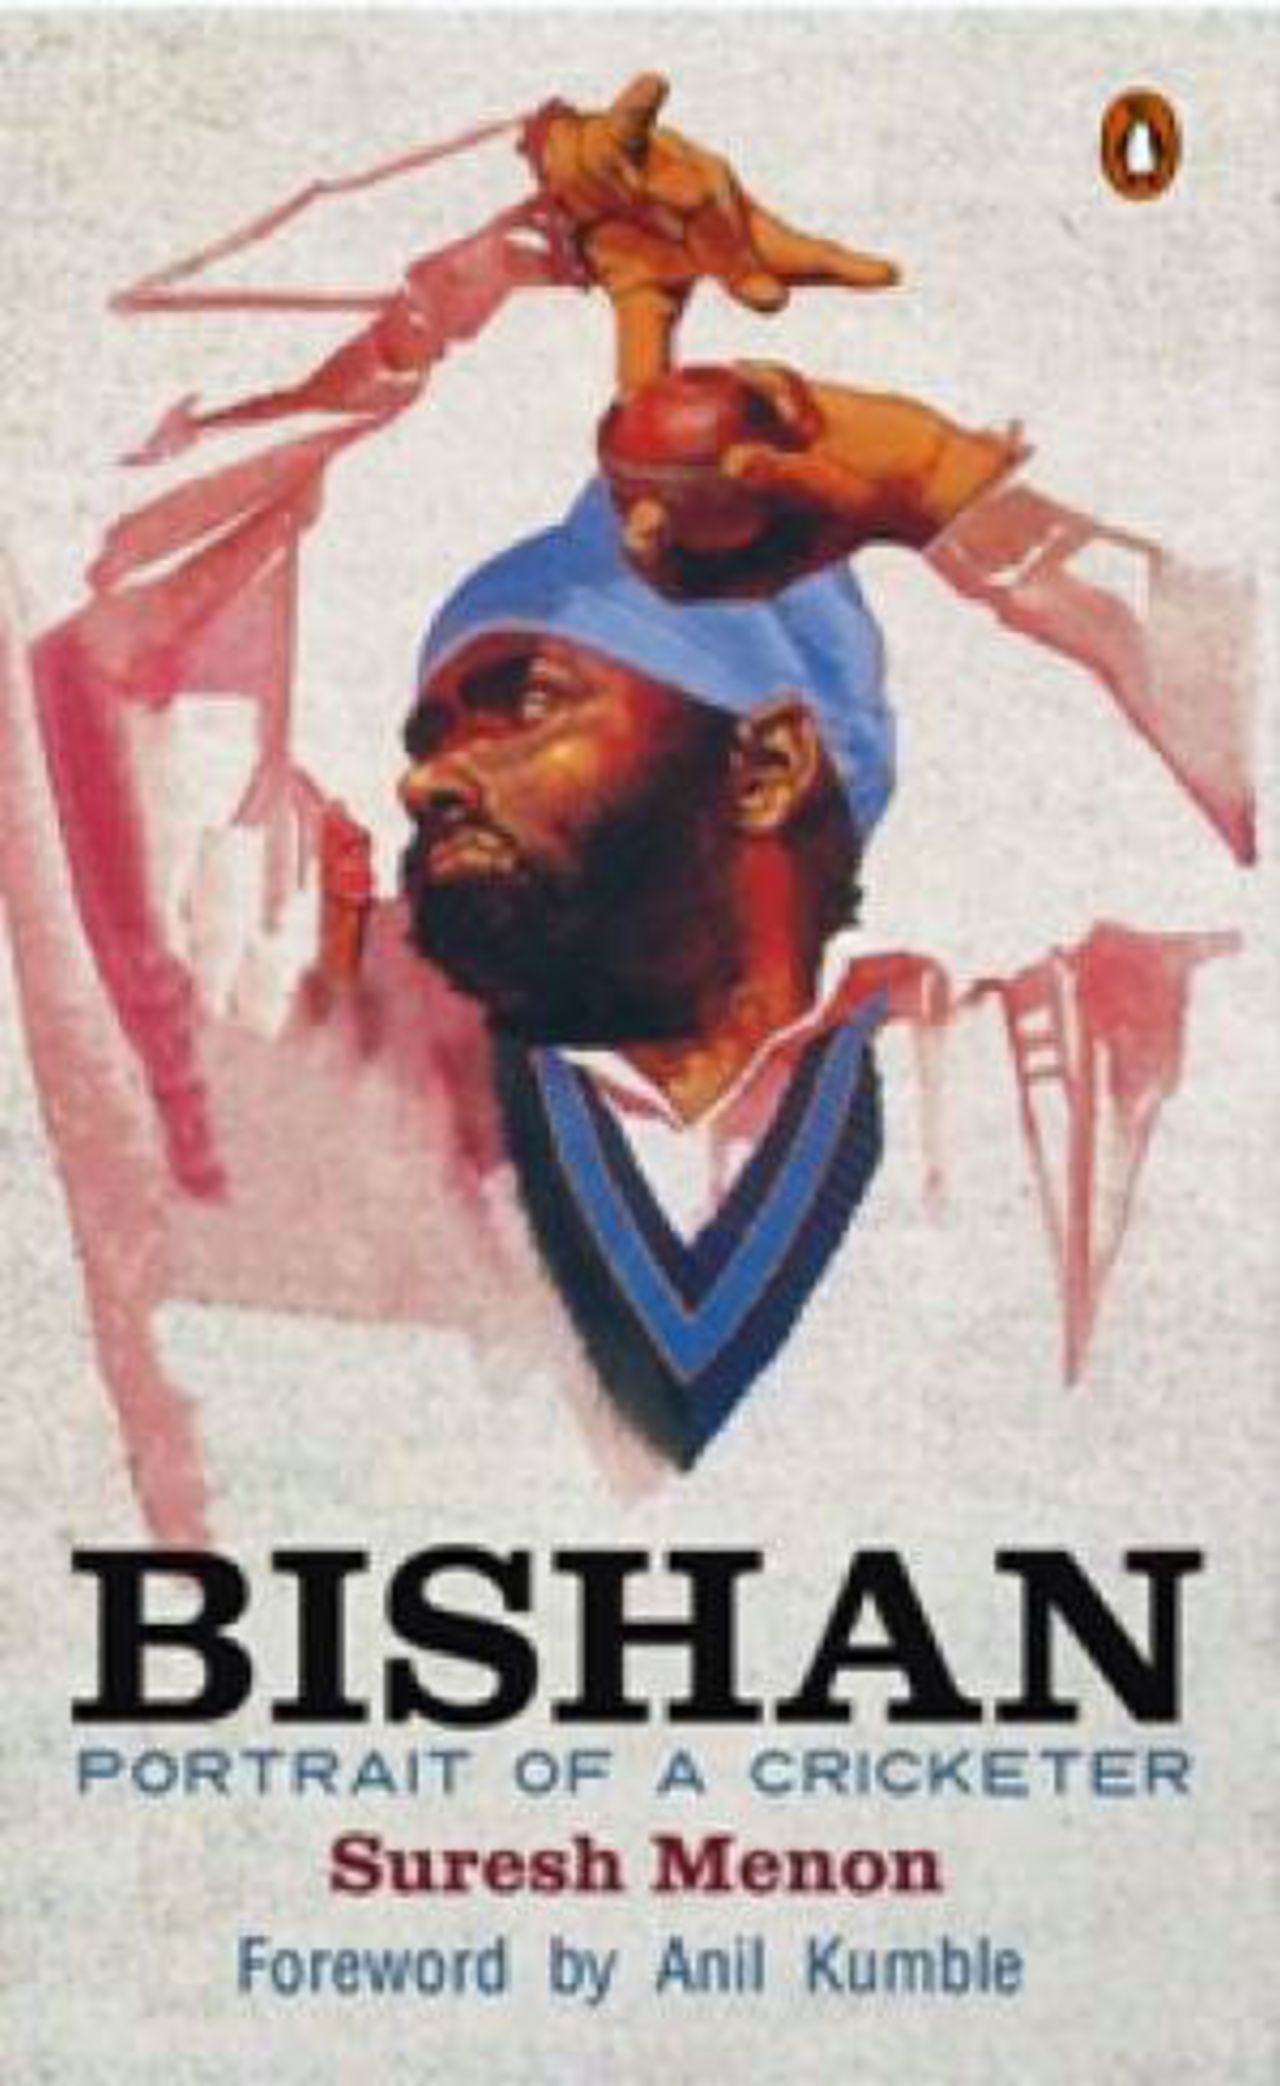 Cover image of <i>Bishan: Portrait of a Cricketer</i> by Suresh Menon